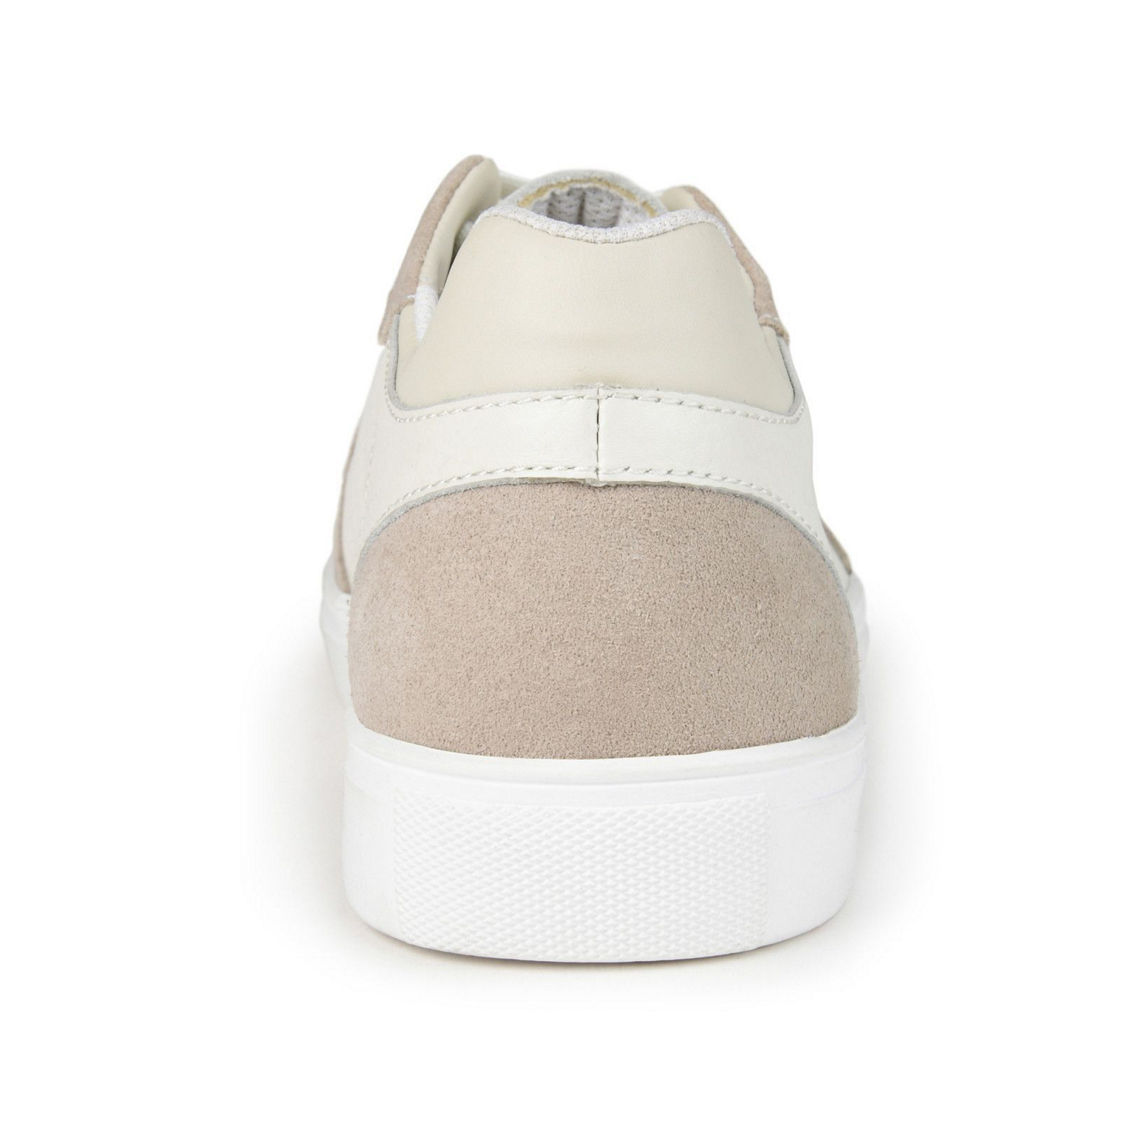 Thomas & Vine Gambit Casual Leather Sneaker - Image 3 of 4